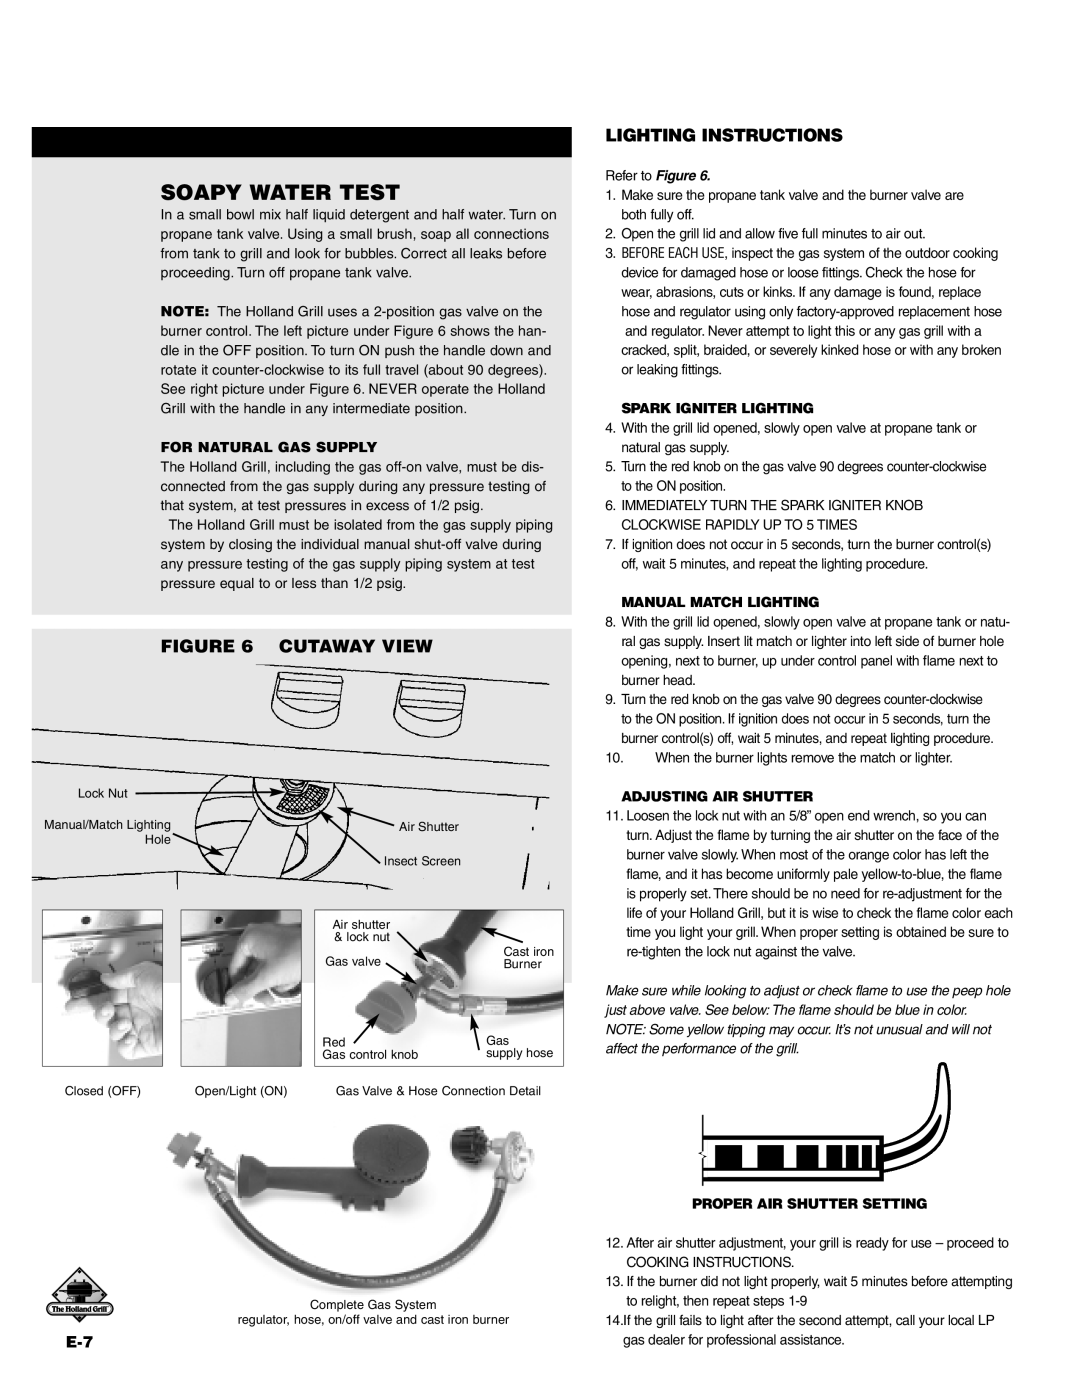 Holland BH421-AG4 manual Lighting Instructions, When the burner lights remove the match or lighter 